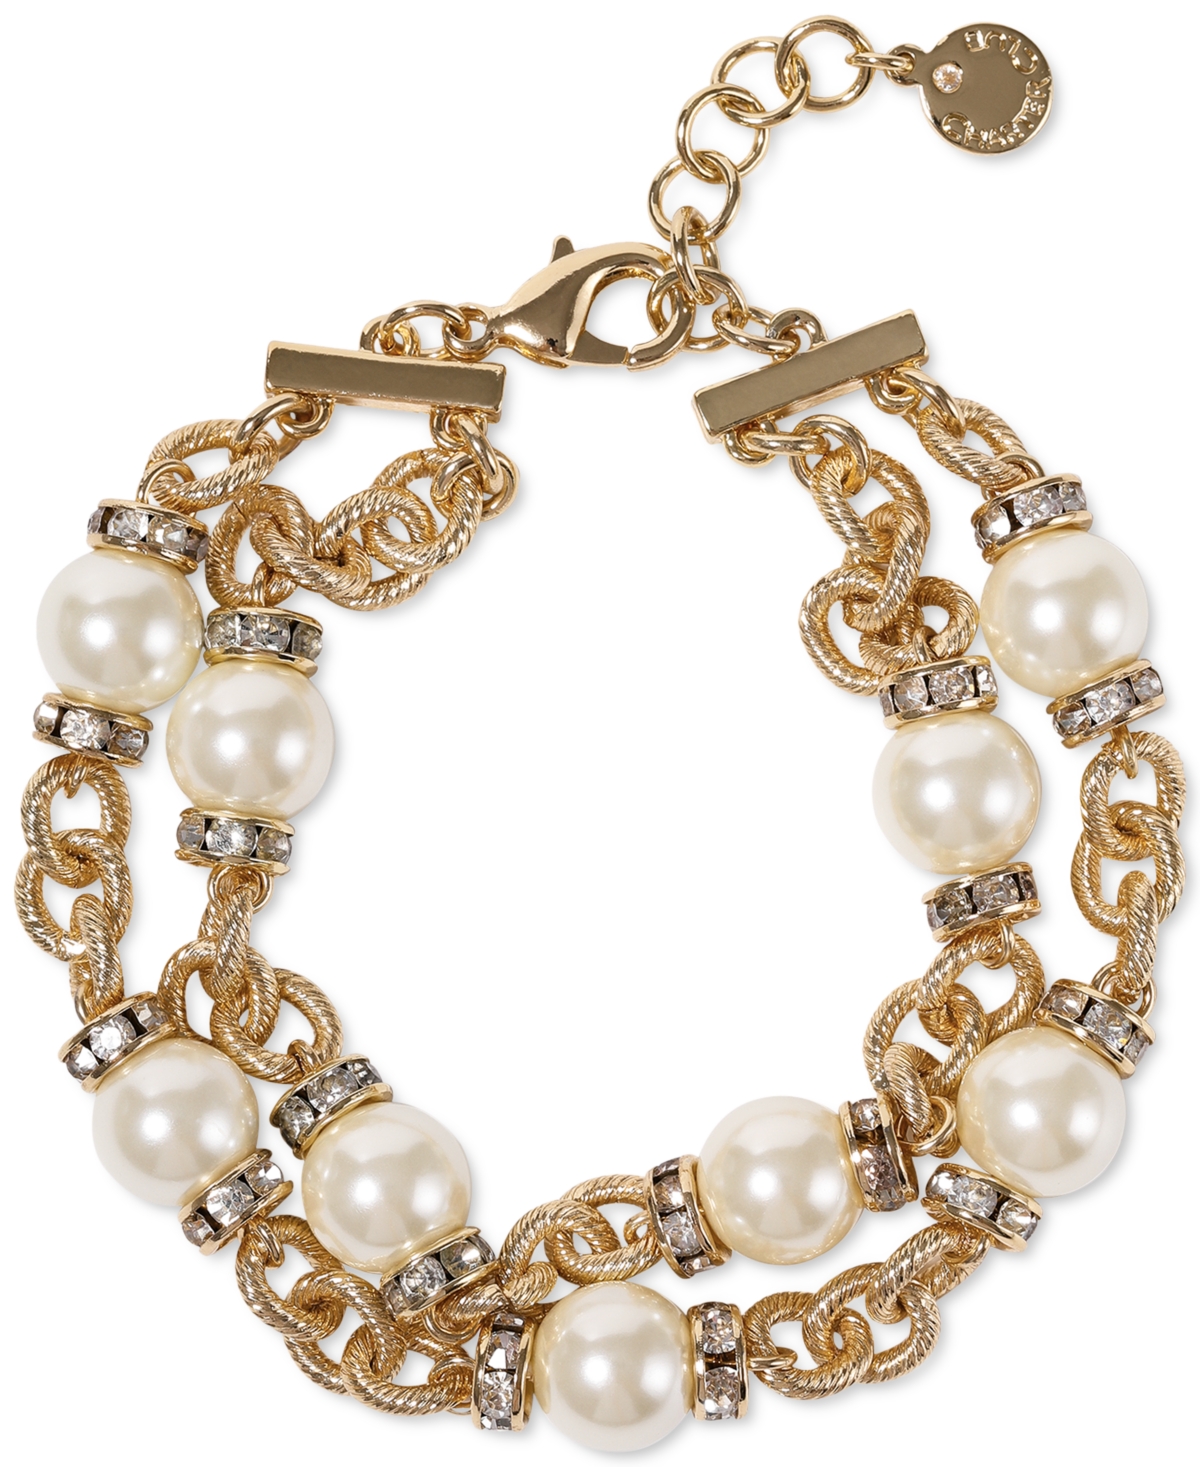 Gold-Tone Pave Rondelle Bead & Imitation Pearl Double-Row Link Bracelet, Created for Macy's - White